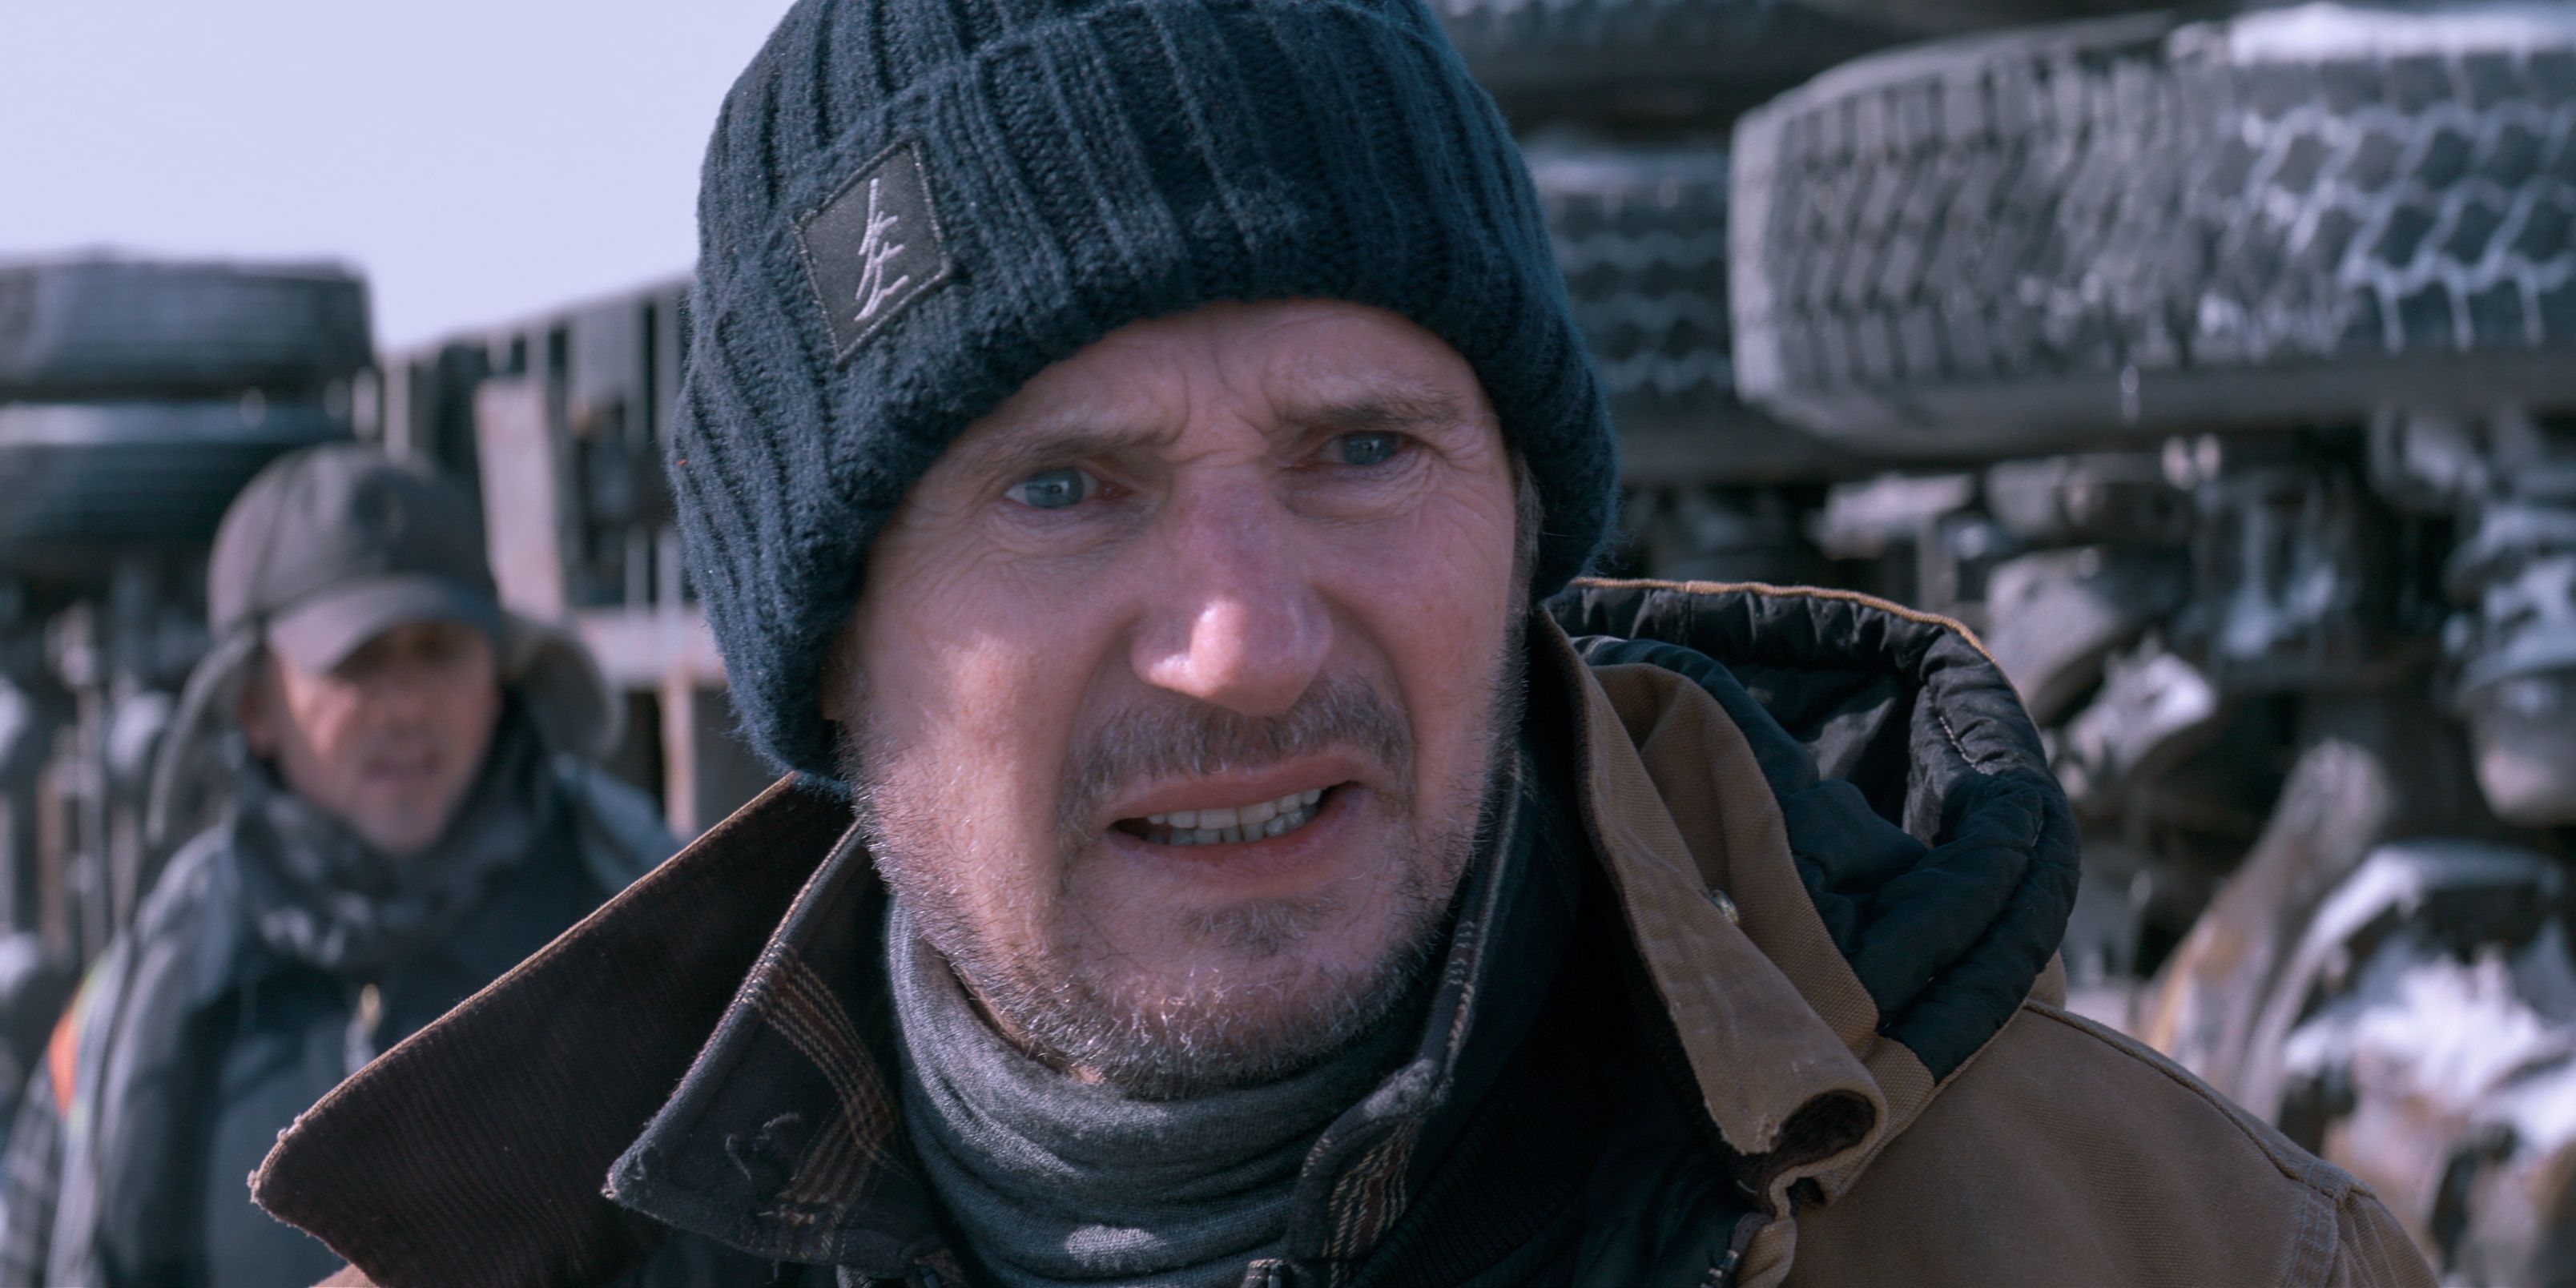 Liam Neeson in The Ice Road